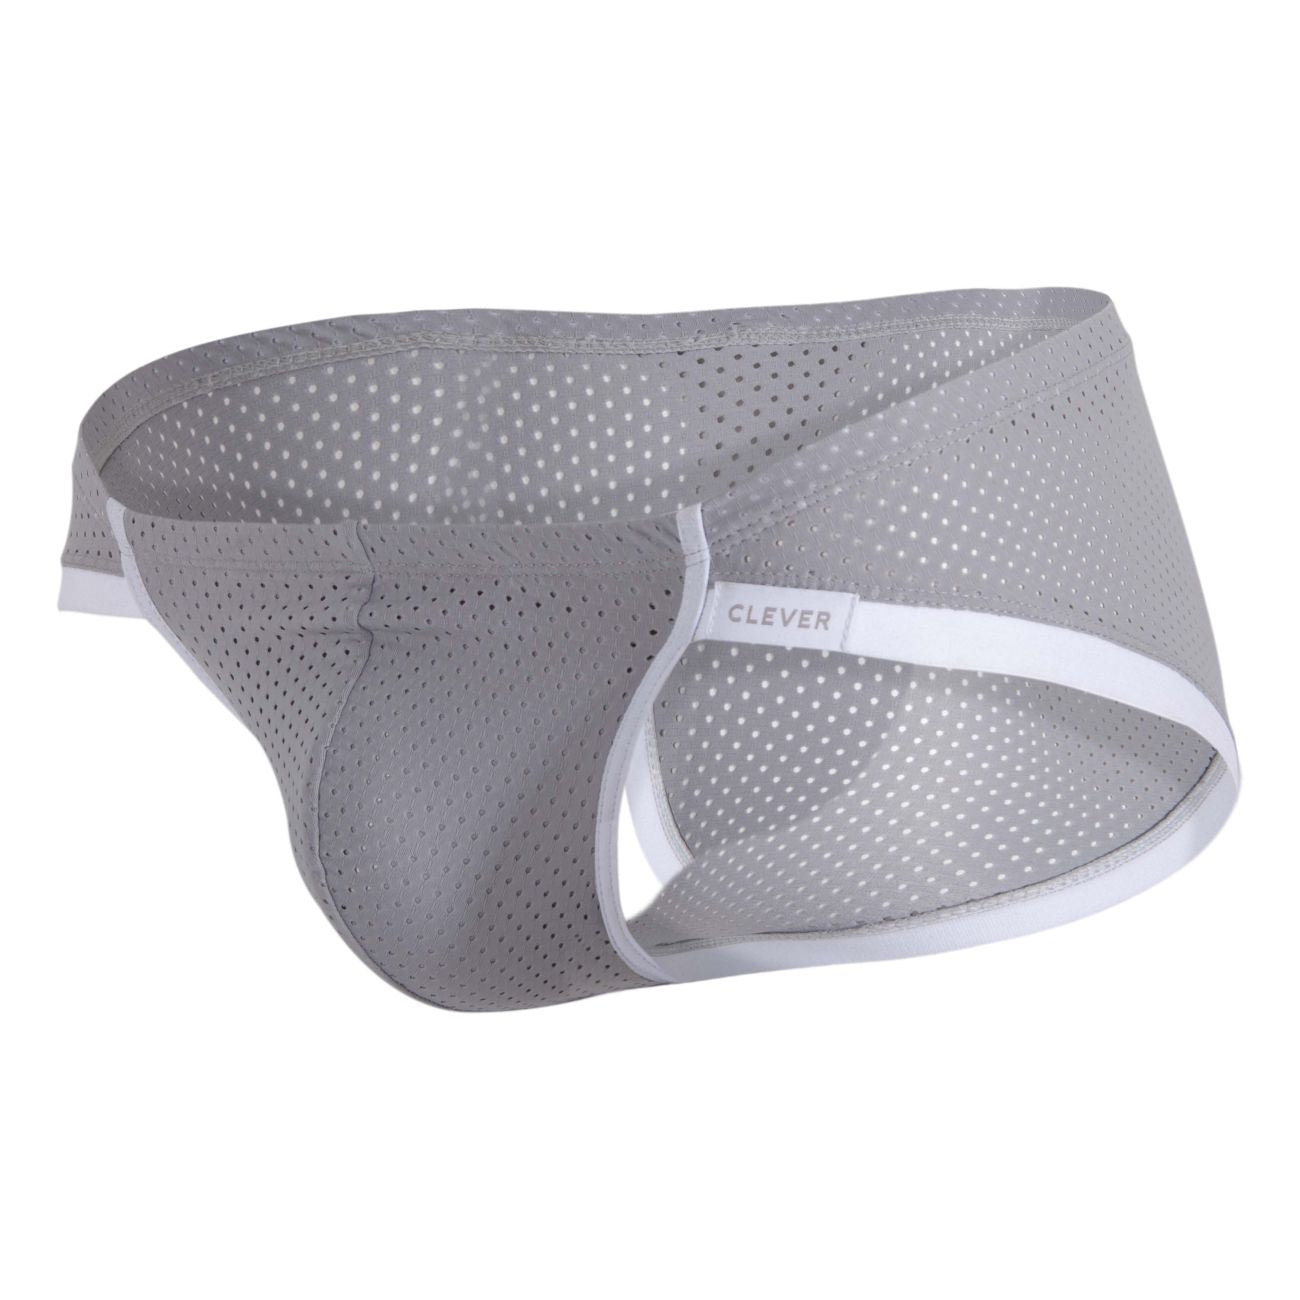 Clever 1447 Fable Briefs Gray